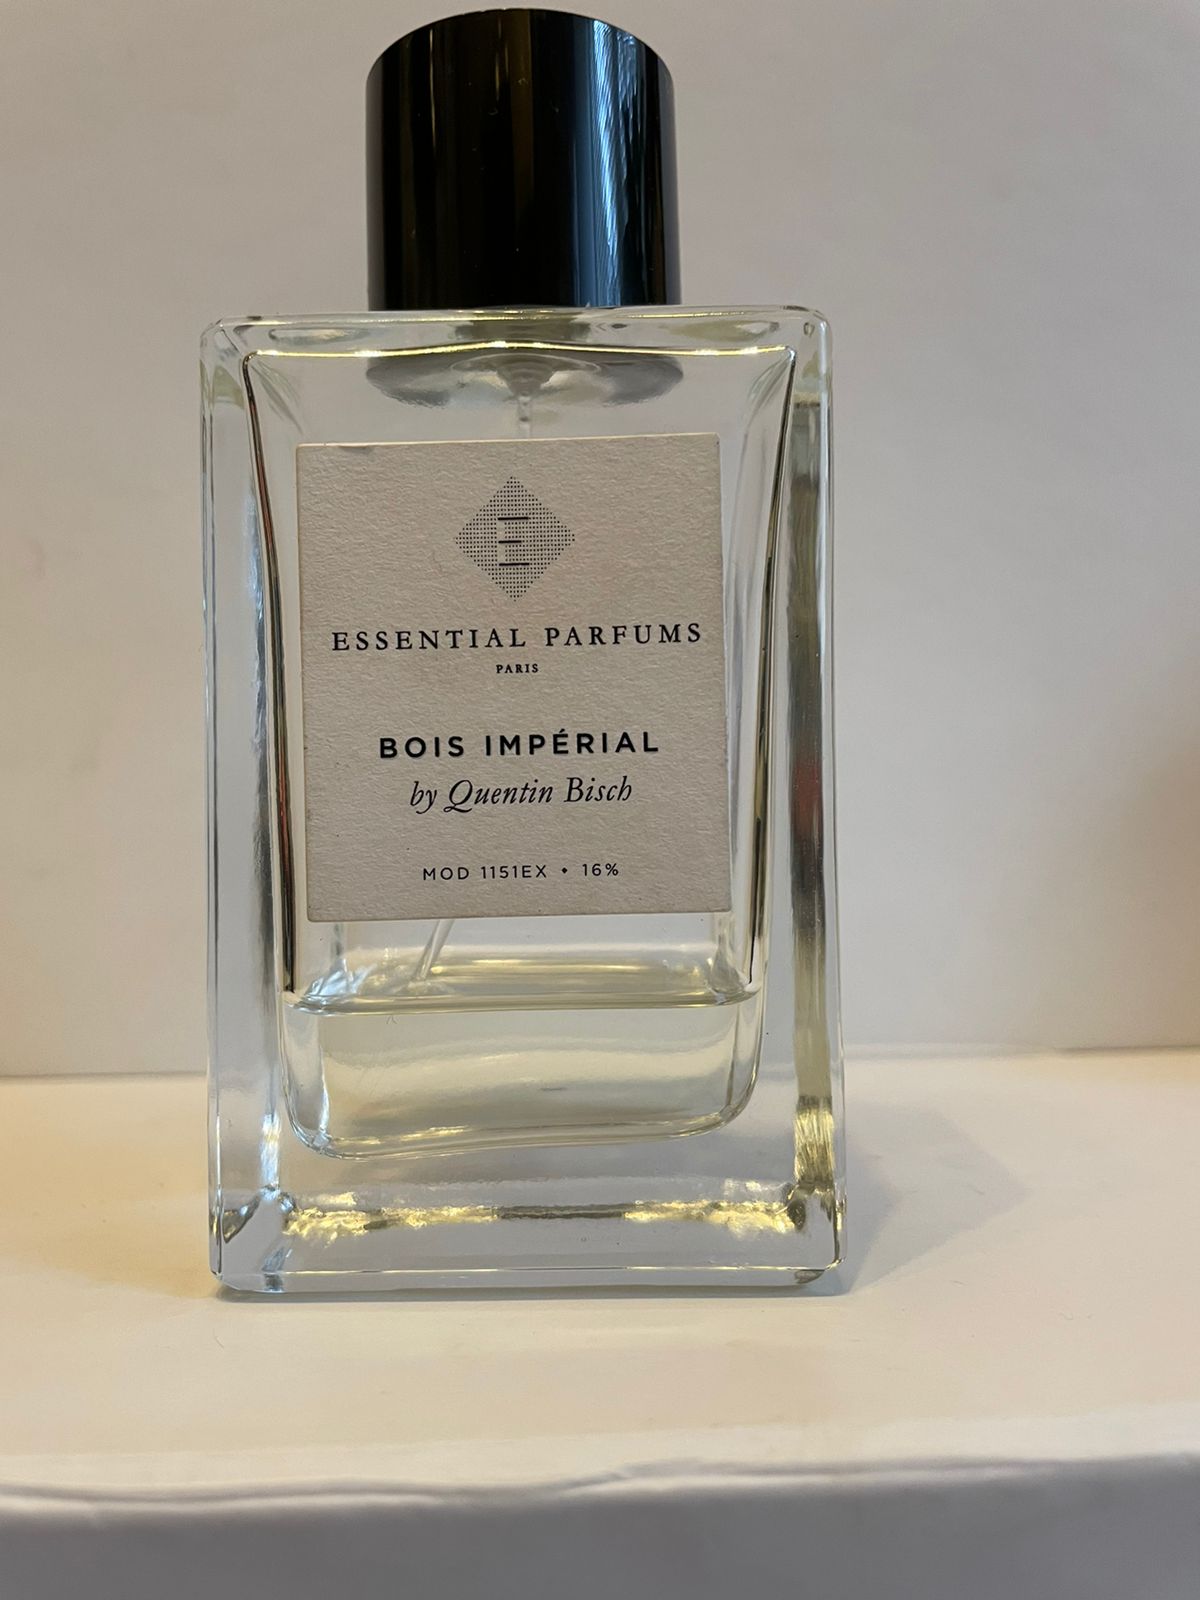 Bois imperial limited. Bois Imperial Essential. Bois Imperial духи. Духи Essential Parfums bois Imperial. Essential Parfums bois Imperial by Quentin bisch.